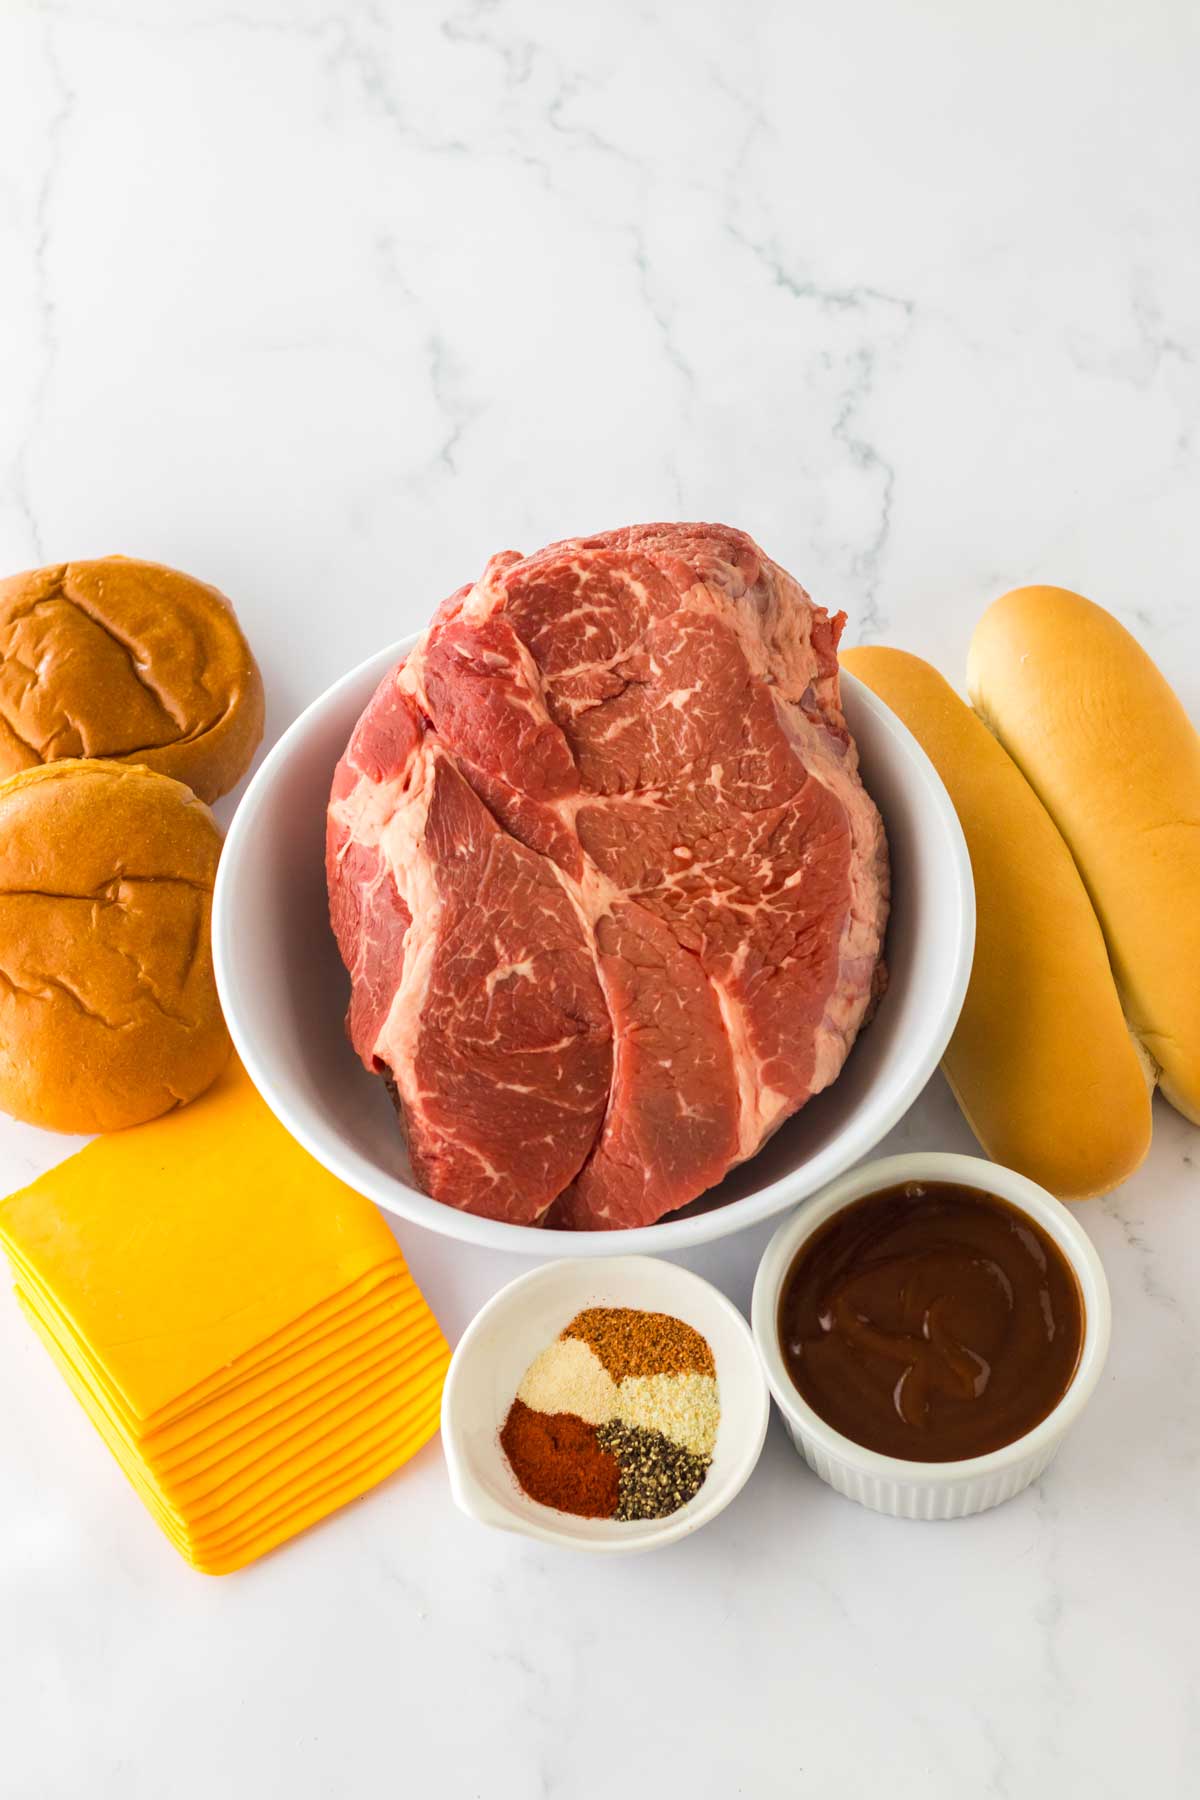 Ingredients for Slow Cooker BBQ Beef Sandwiches are the following: beef roast, onion powder, garlic salt (or garlic powder), black pepper, smoked paprika, cajun seasoning, BBQ sauce, buns and cheddar cheese, optional